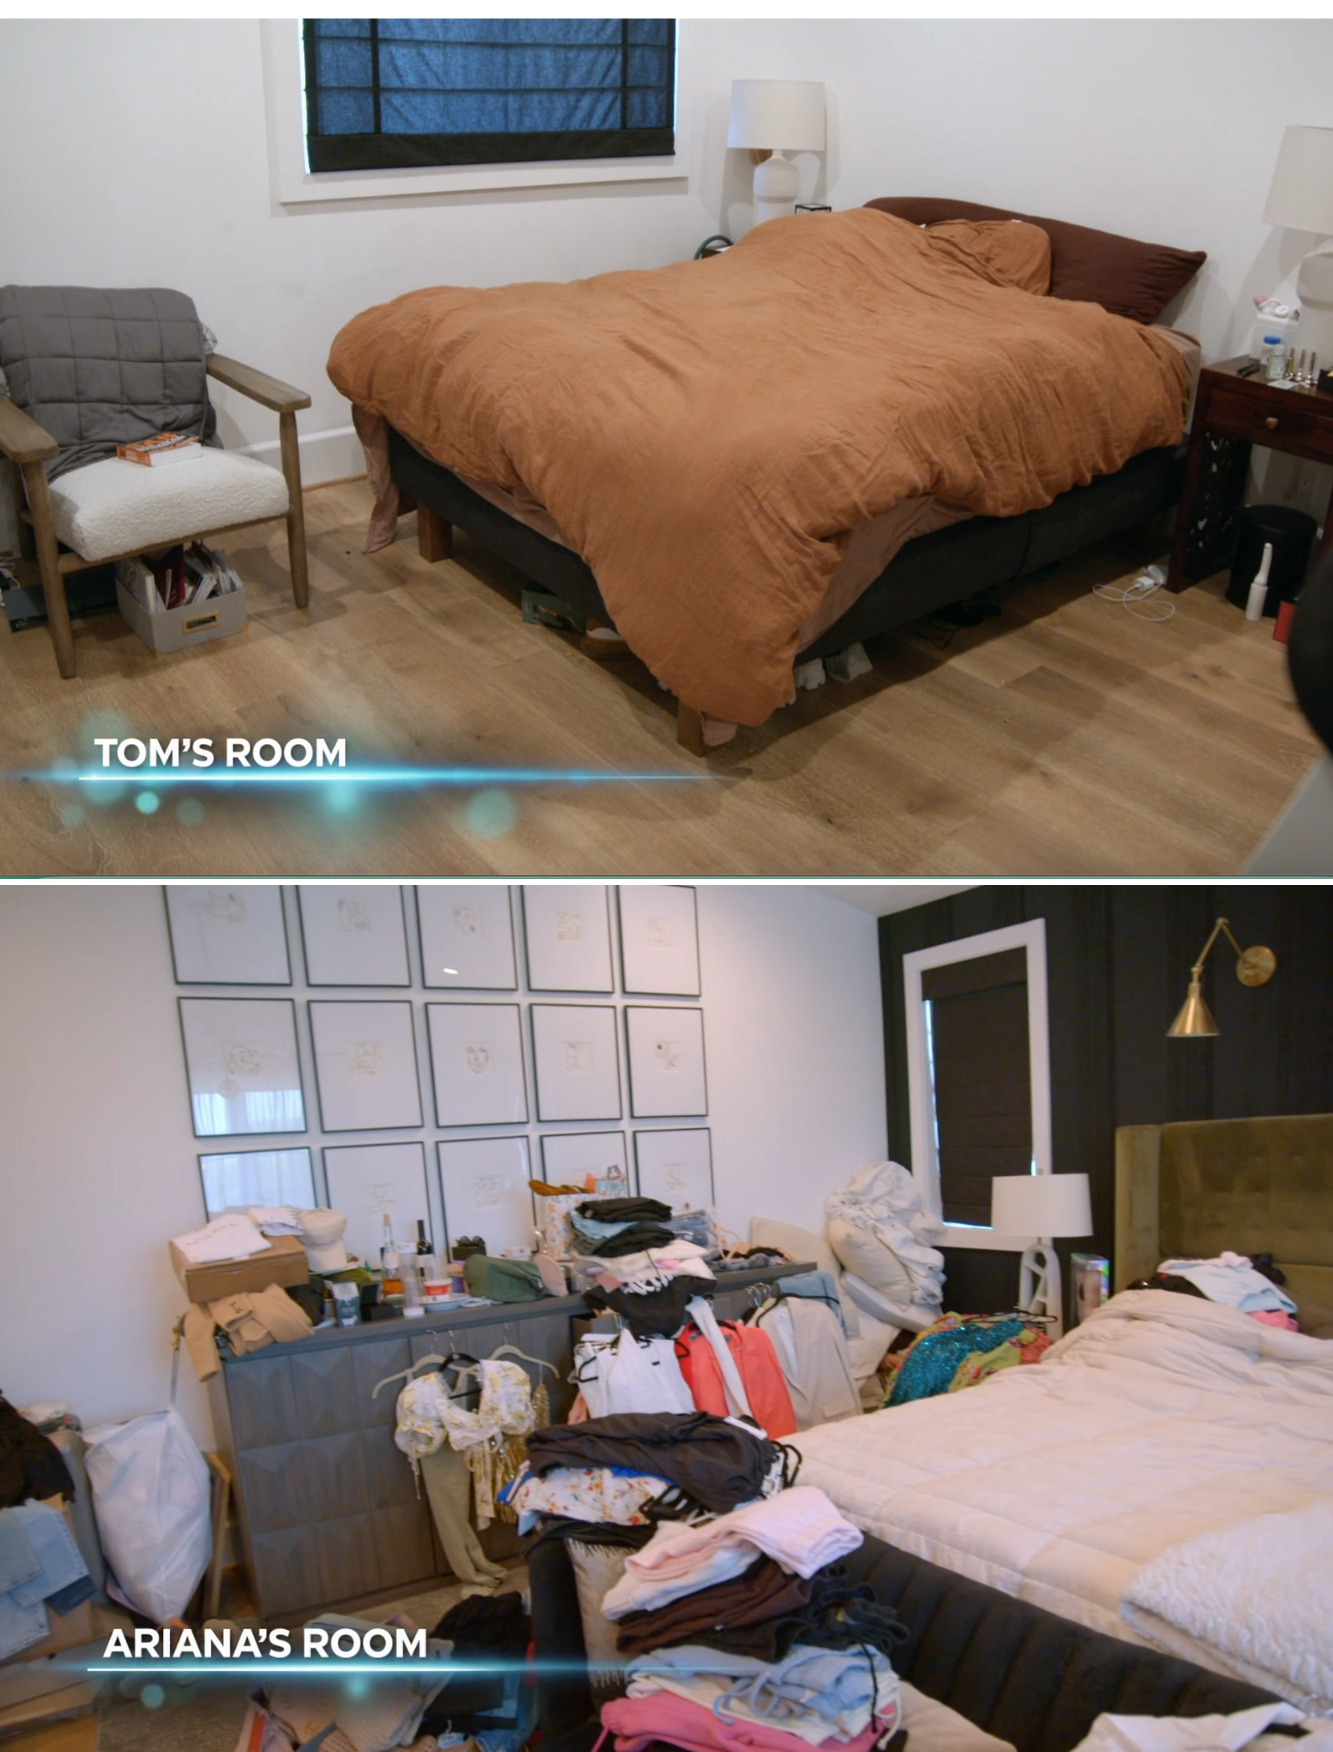 Tom and Ariana&#x27;s separate rooms